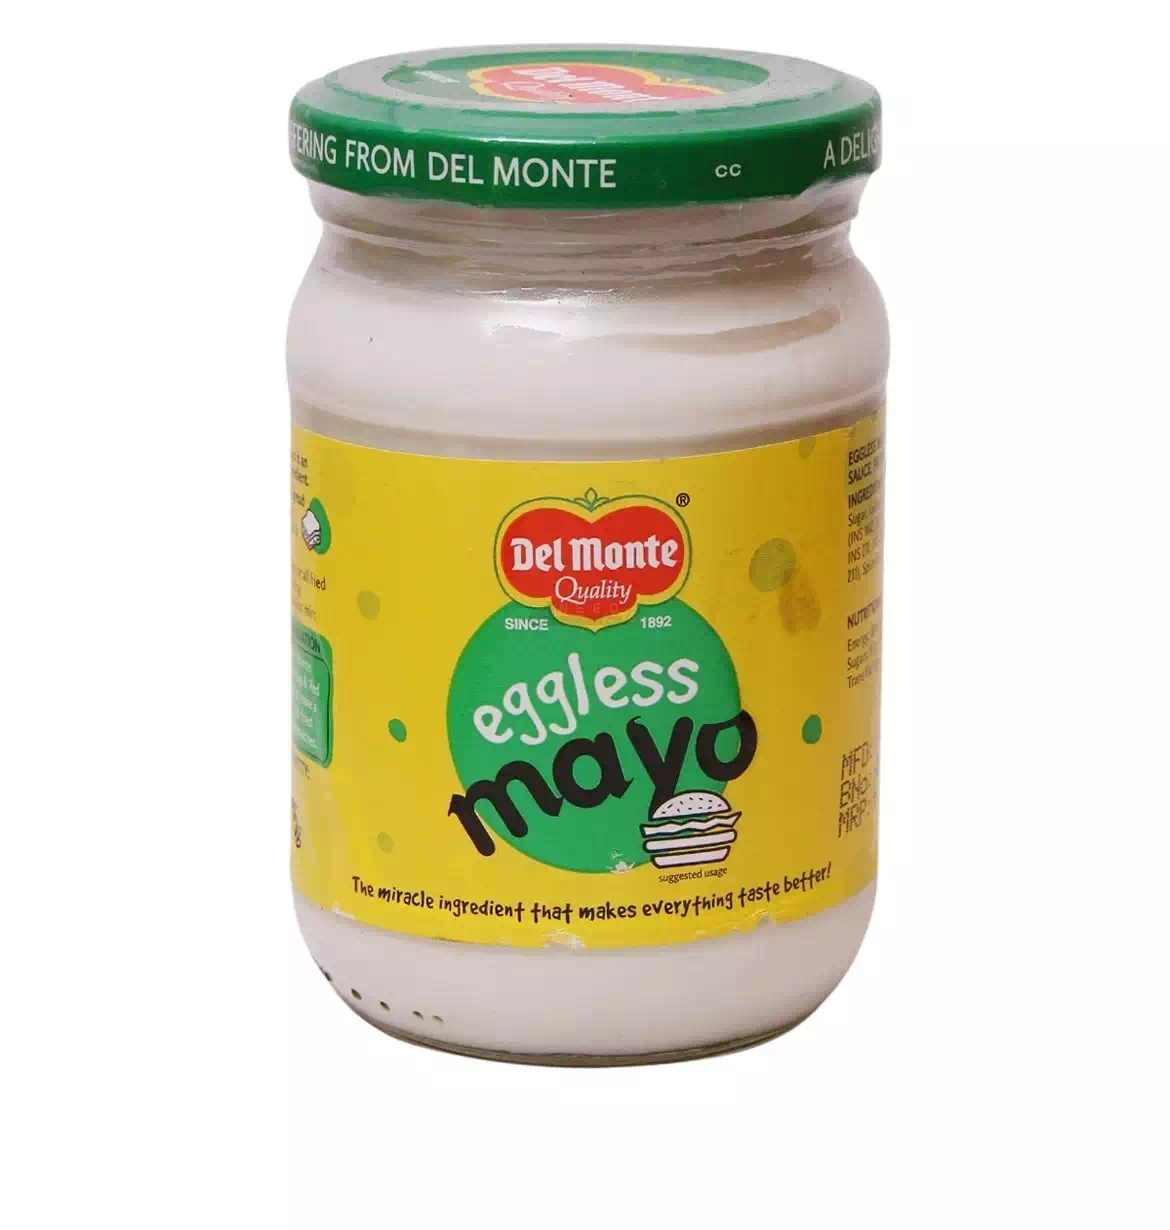 DEL MONTE EGGLESS MAYONNAISE BOTTLE 265 gm